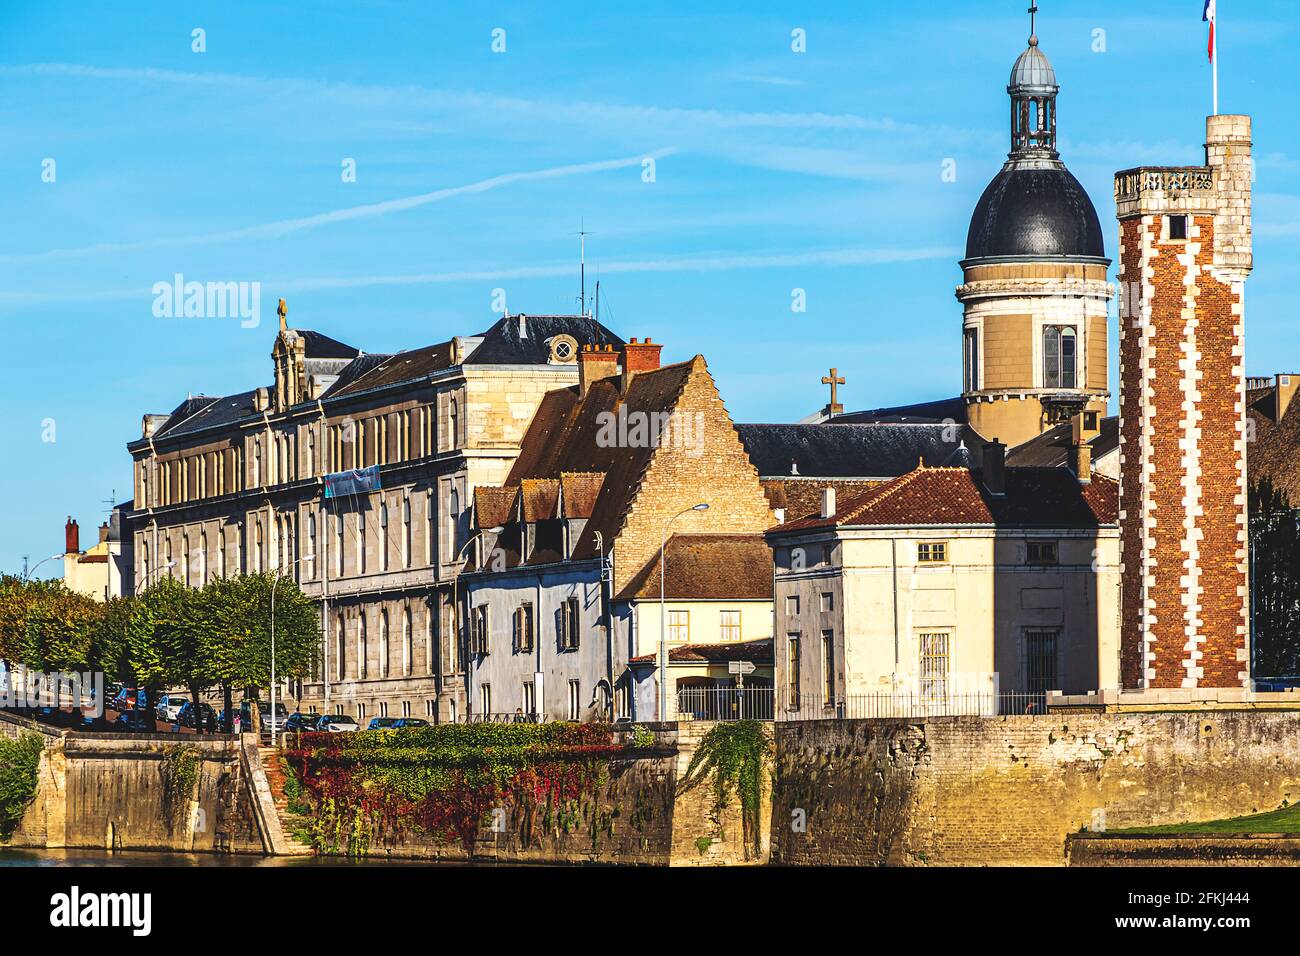 France - Quai des Messageries in Chalon sur Saone, with the Tour du Doyenne from the 15th century in the historic center on the Saint-Laurent Island. Stock Photo